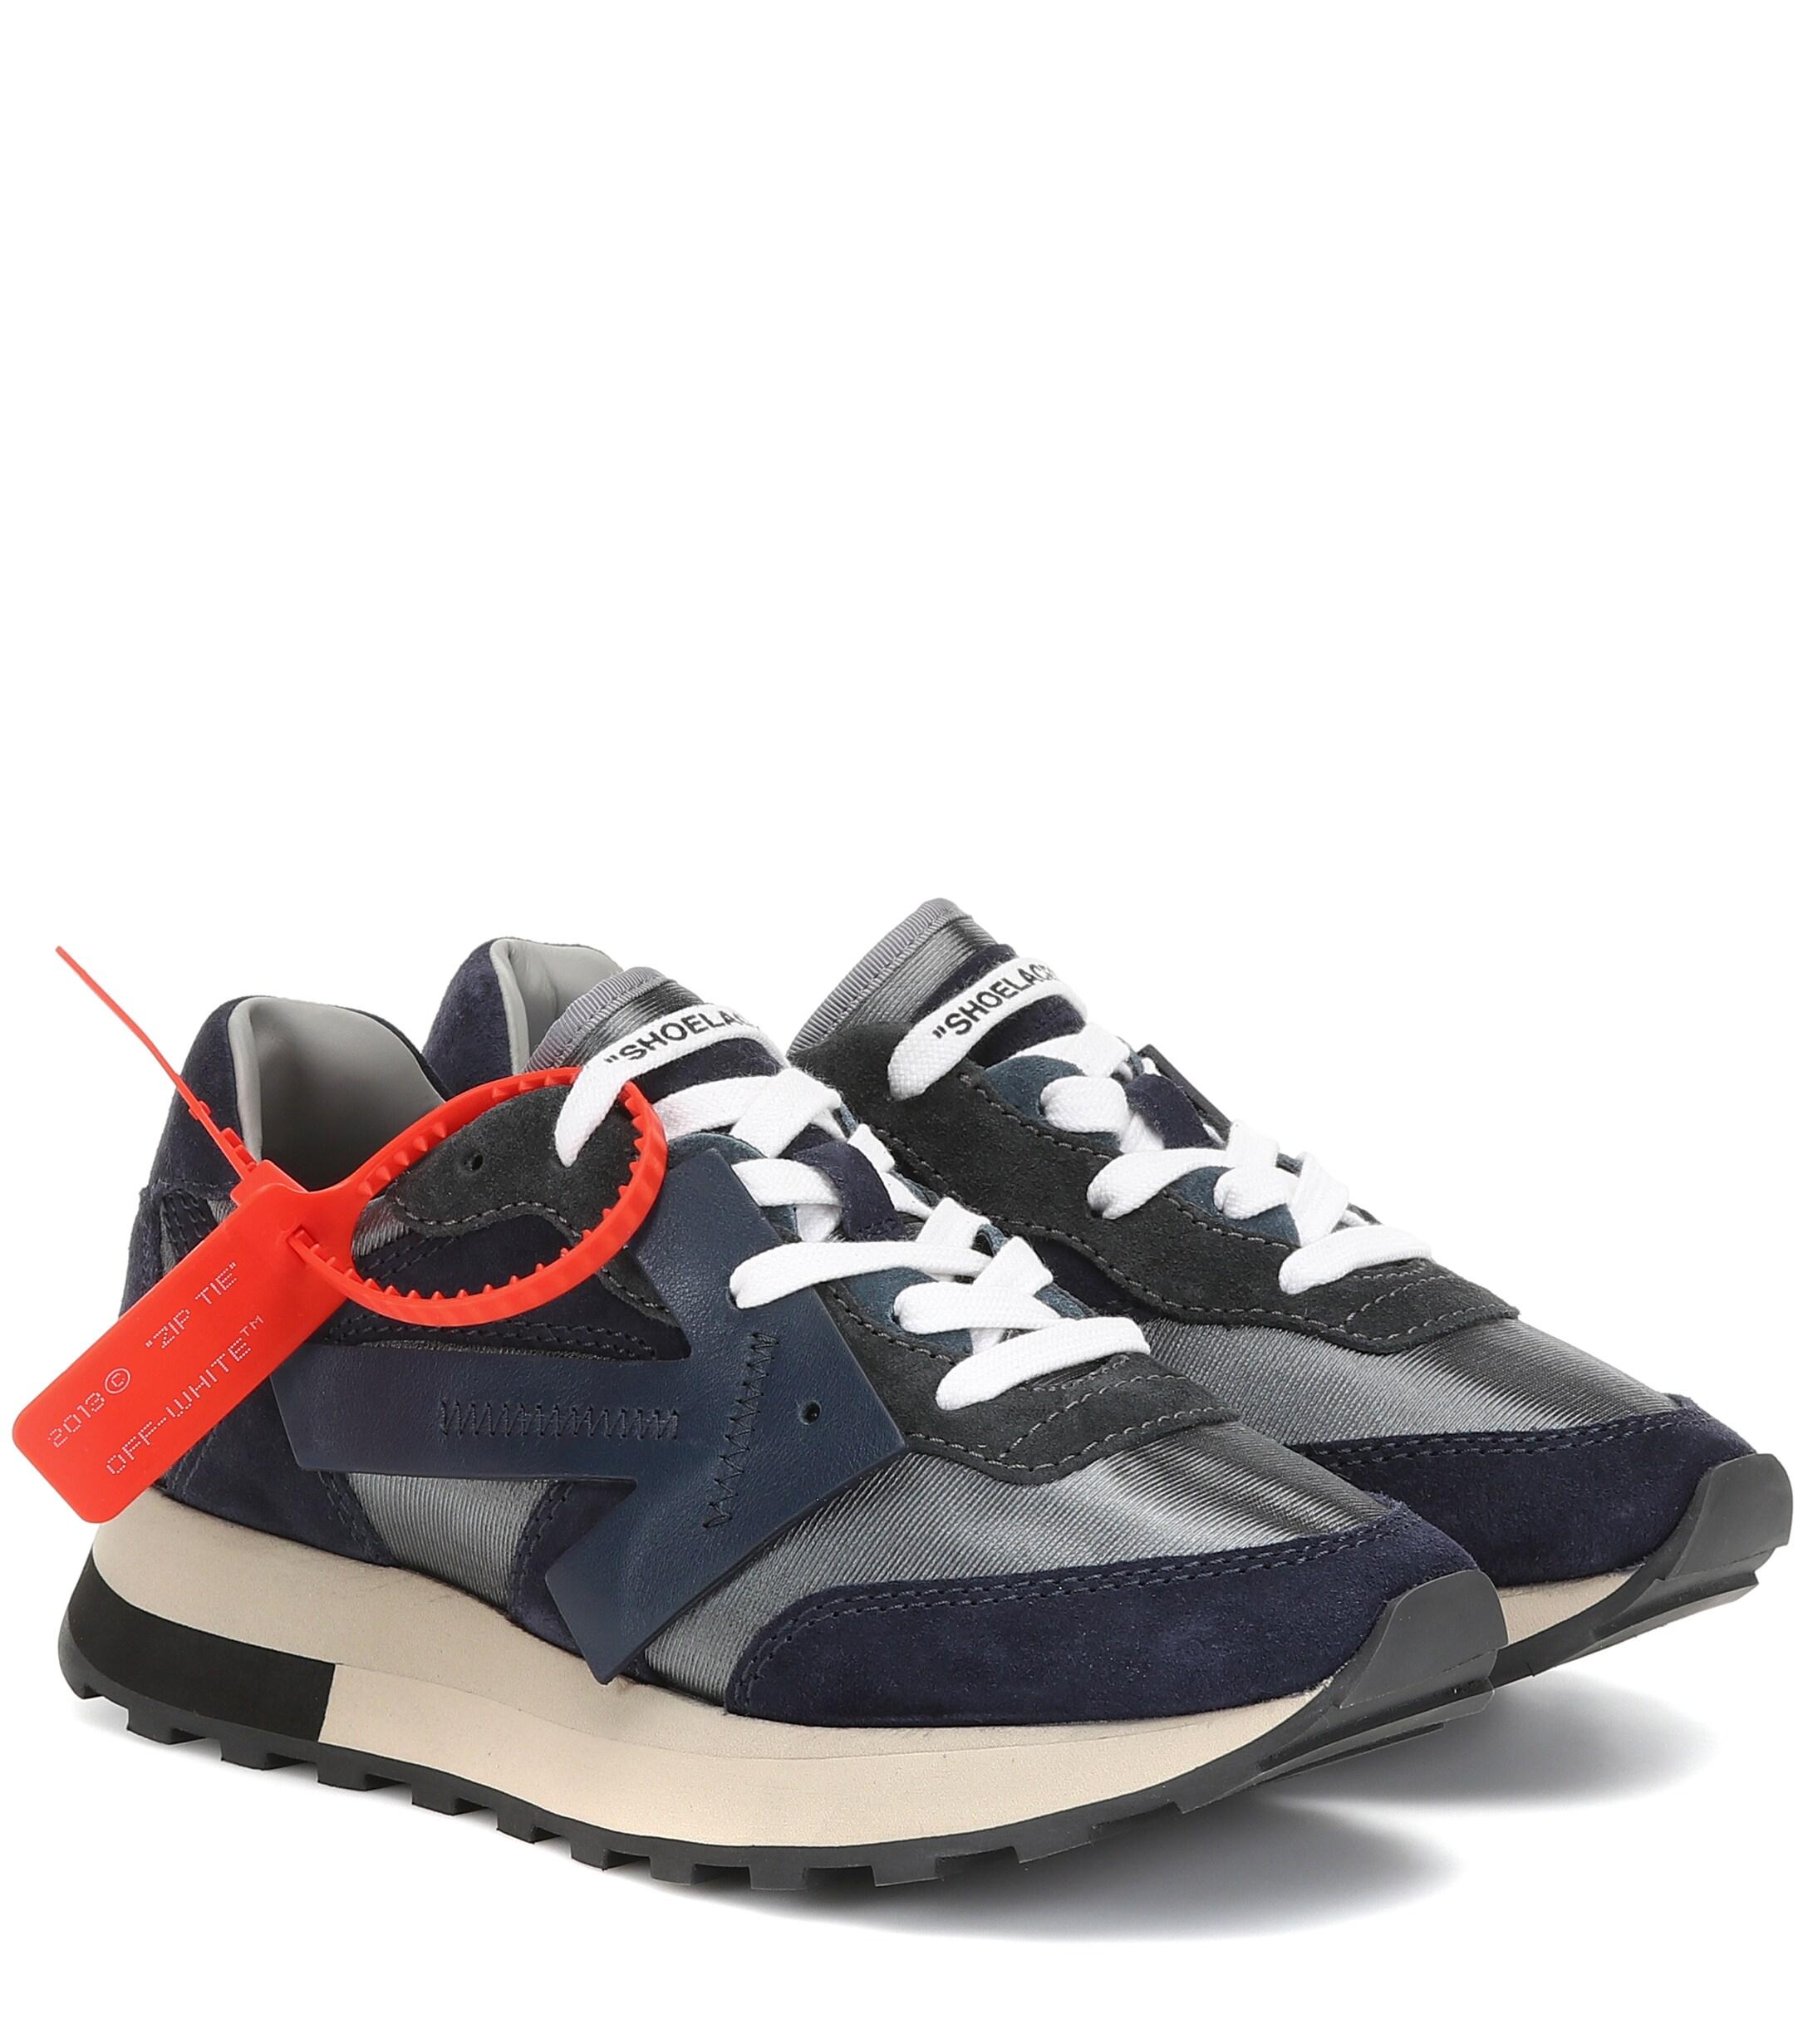 Off-White c/o Virgil Abloh Runner Suede Sneakers in Blue - Lyst